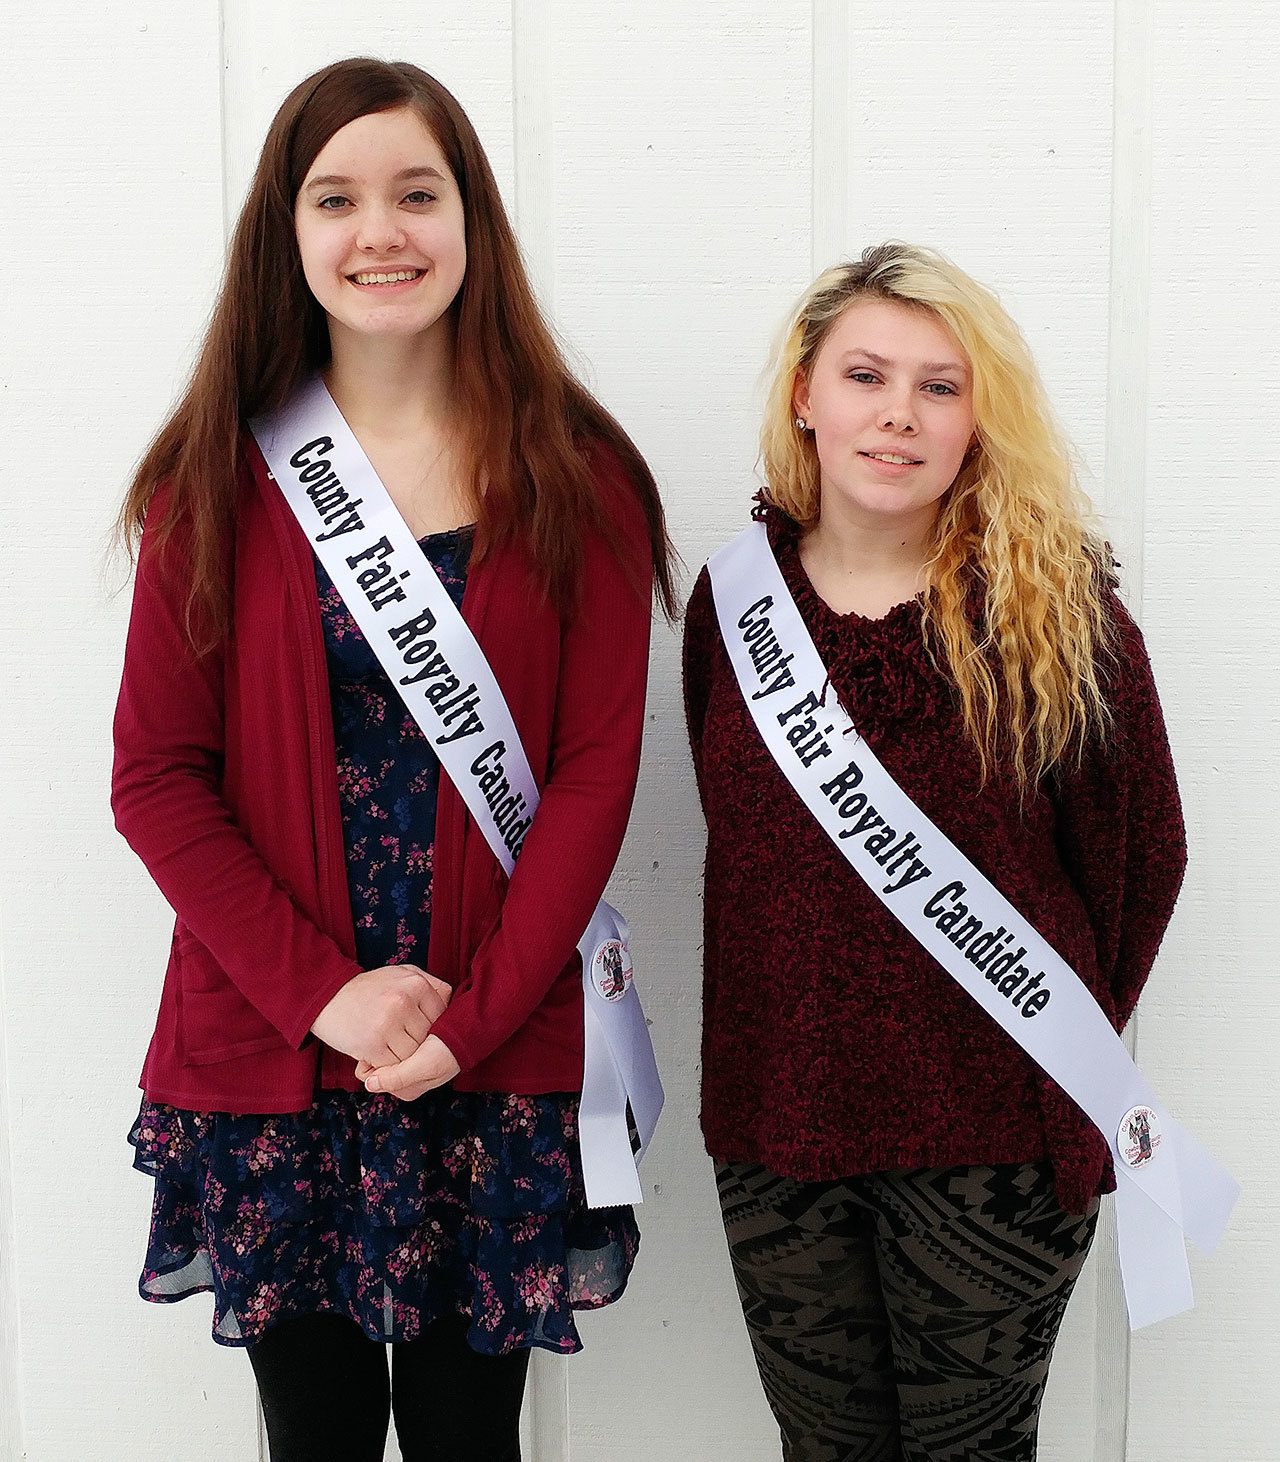 Janeydean O’Connor, left, and Marykate Napiontek are candidates for 2017 Clallam County Fair royalty court.